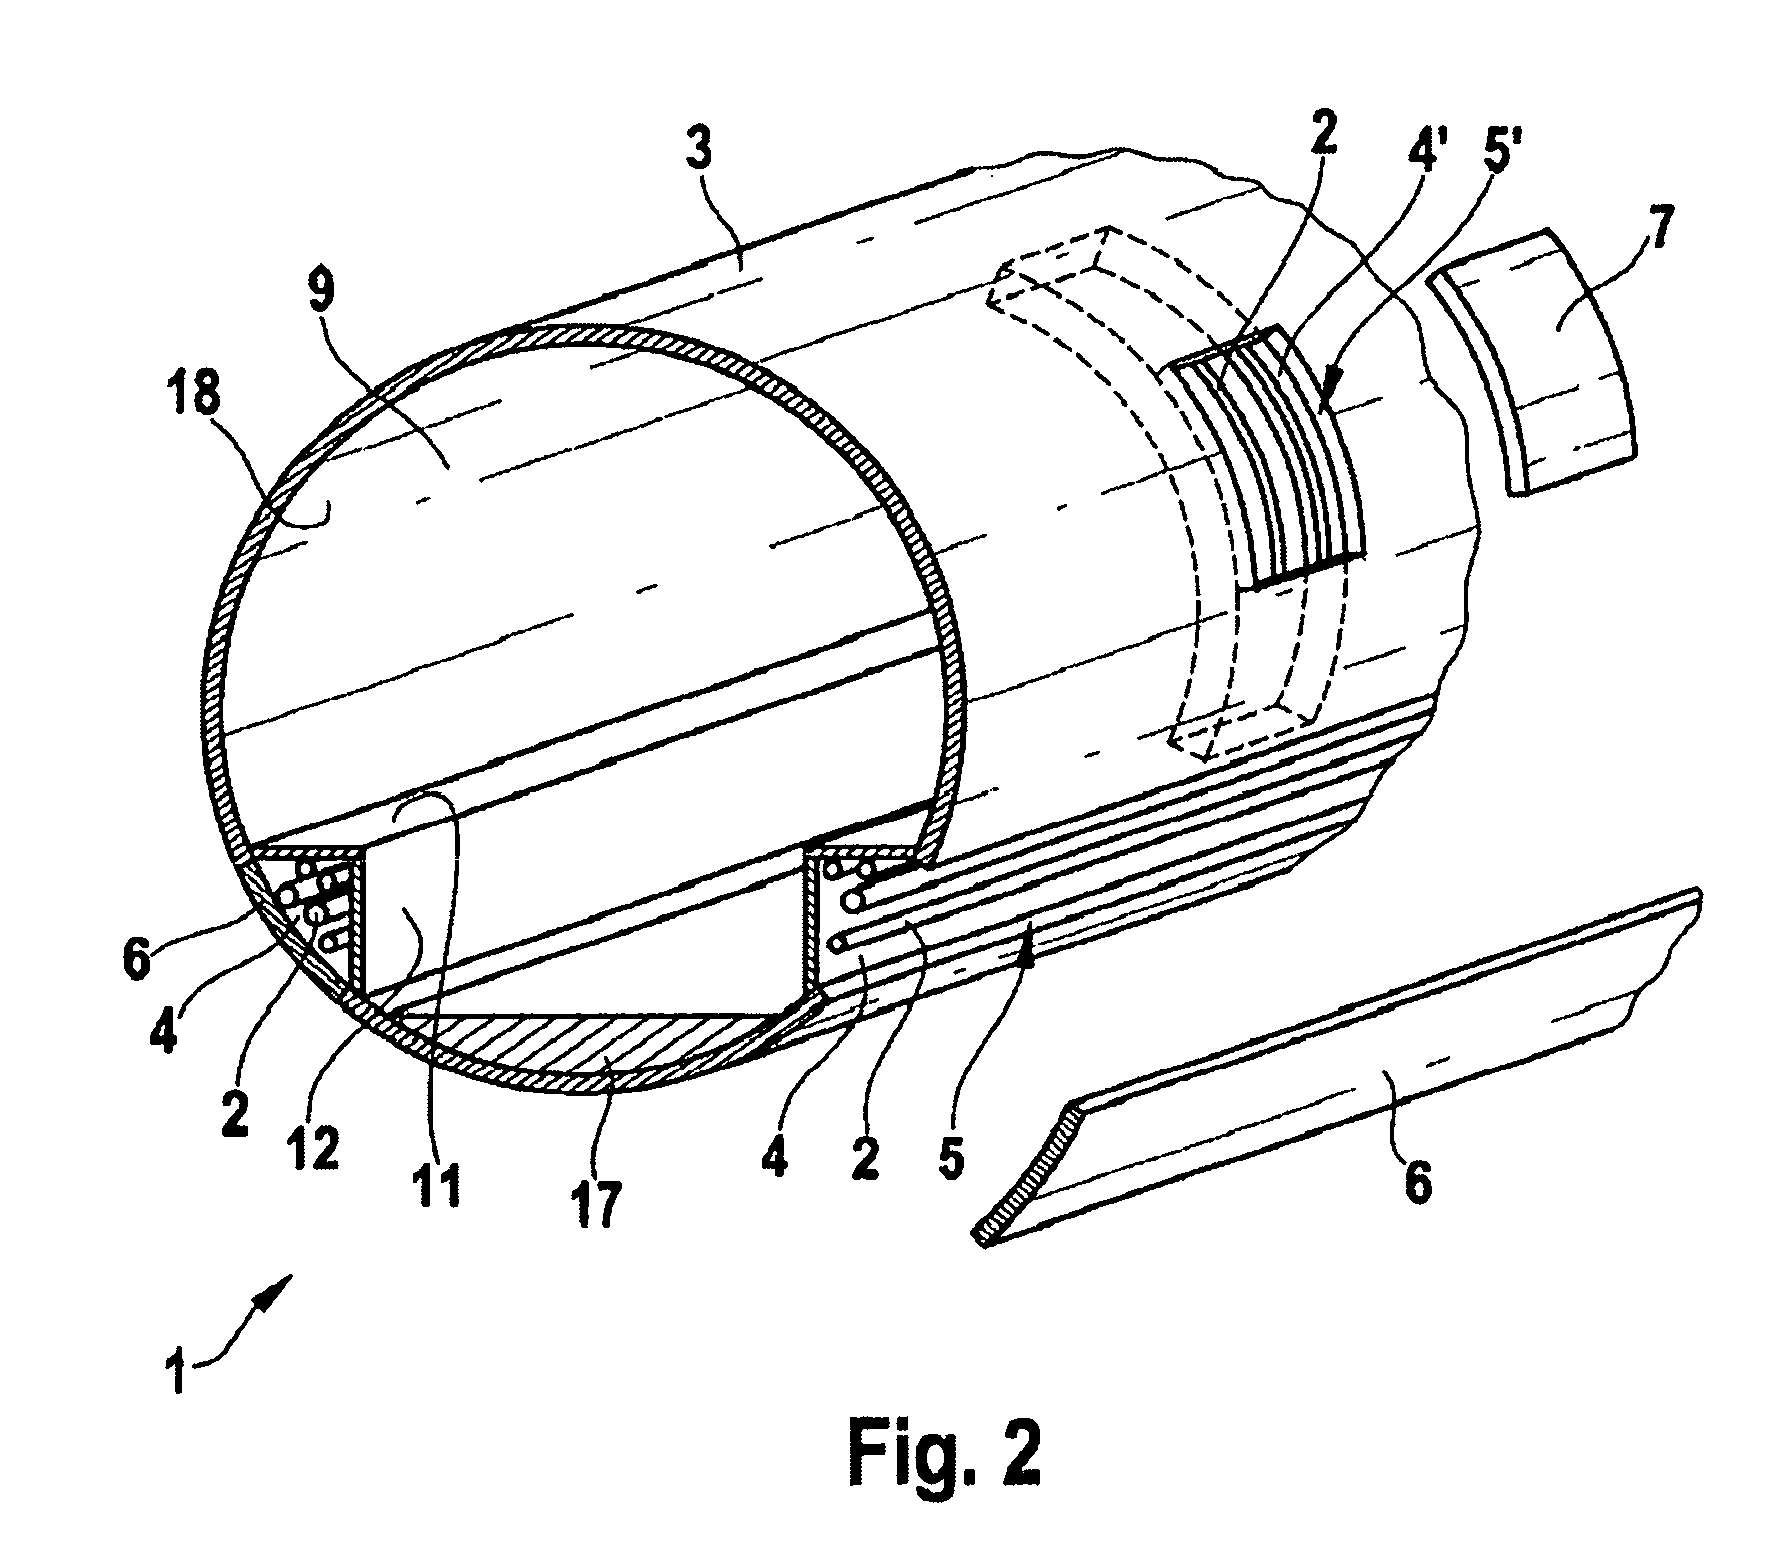 Line system arrangement in an aircraft or spacecraft having a fuselage